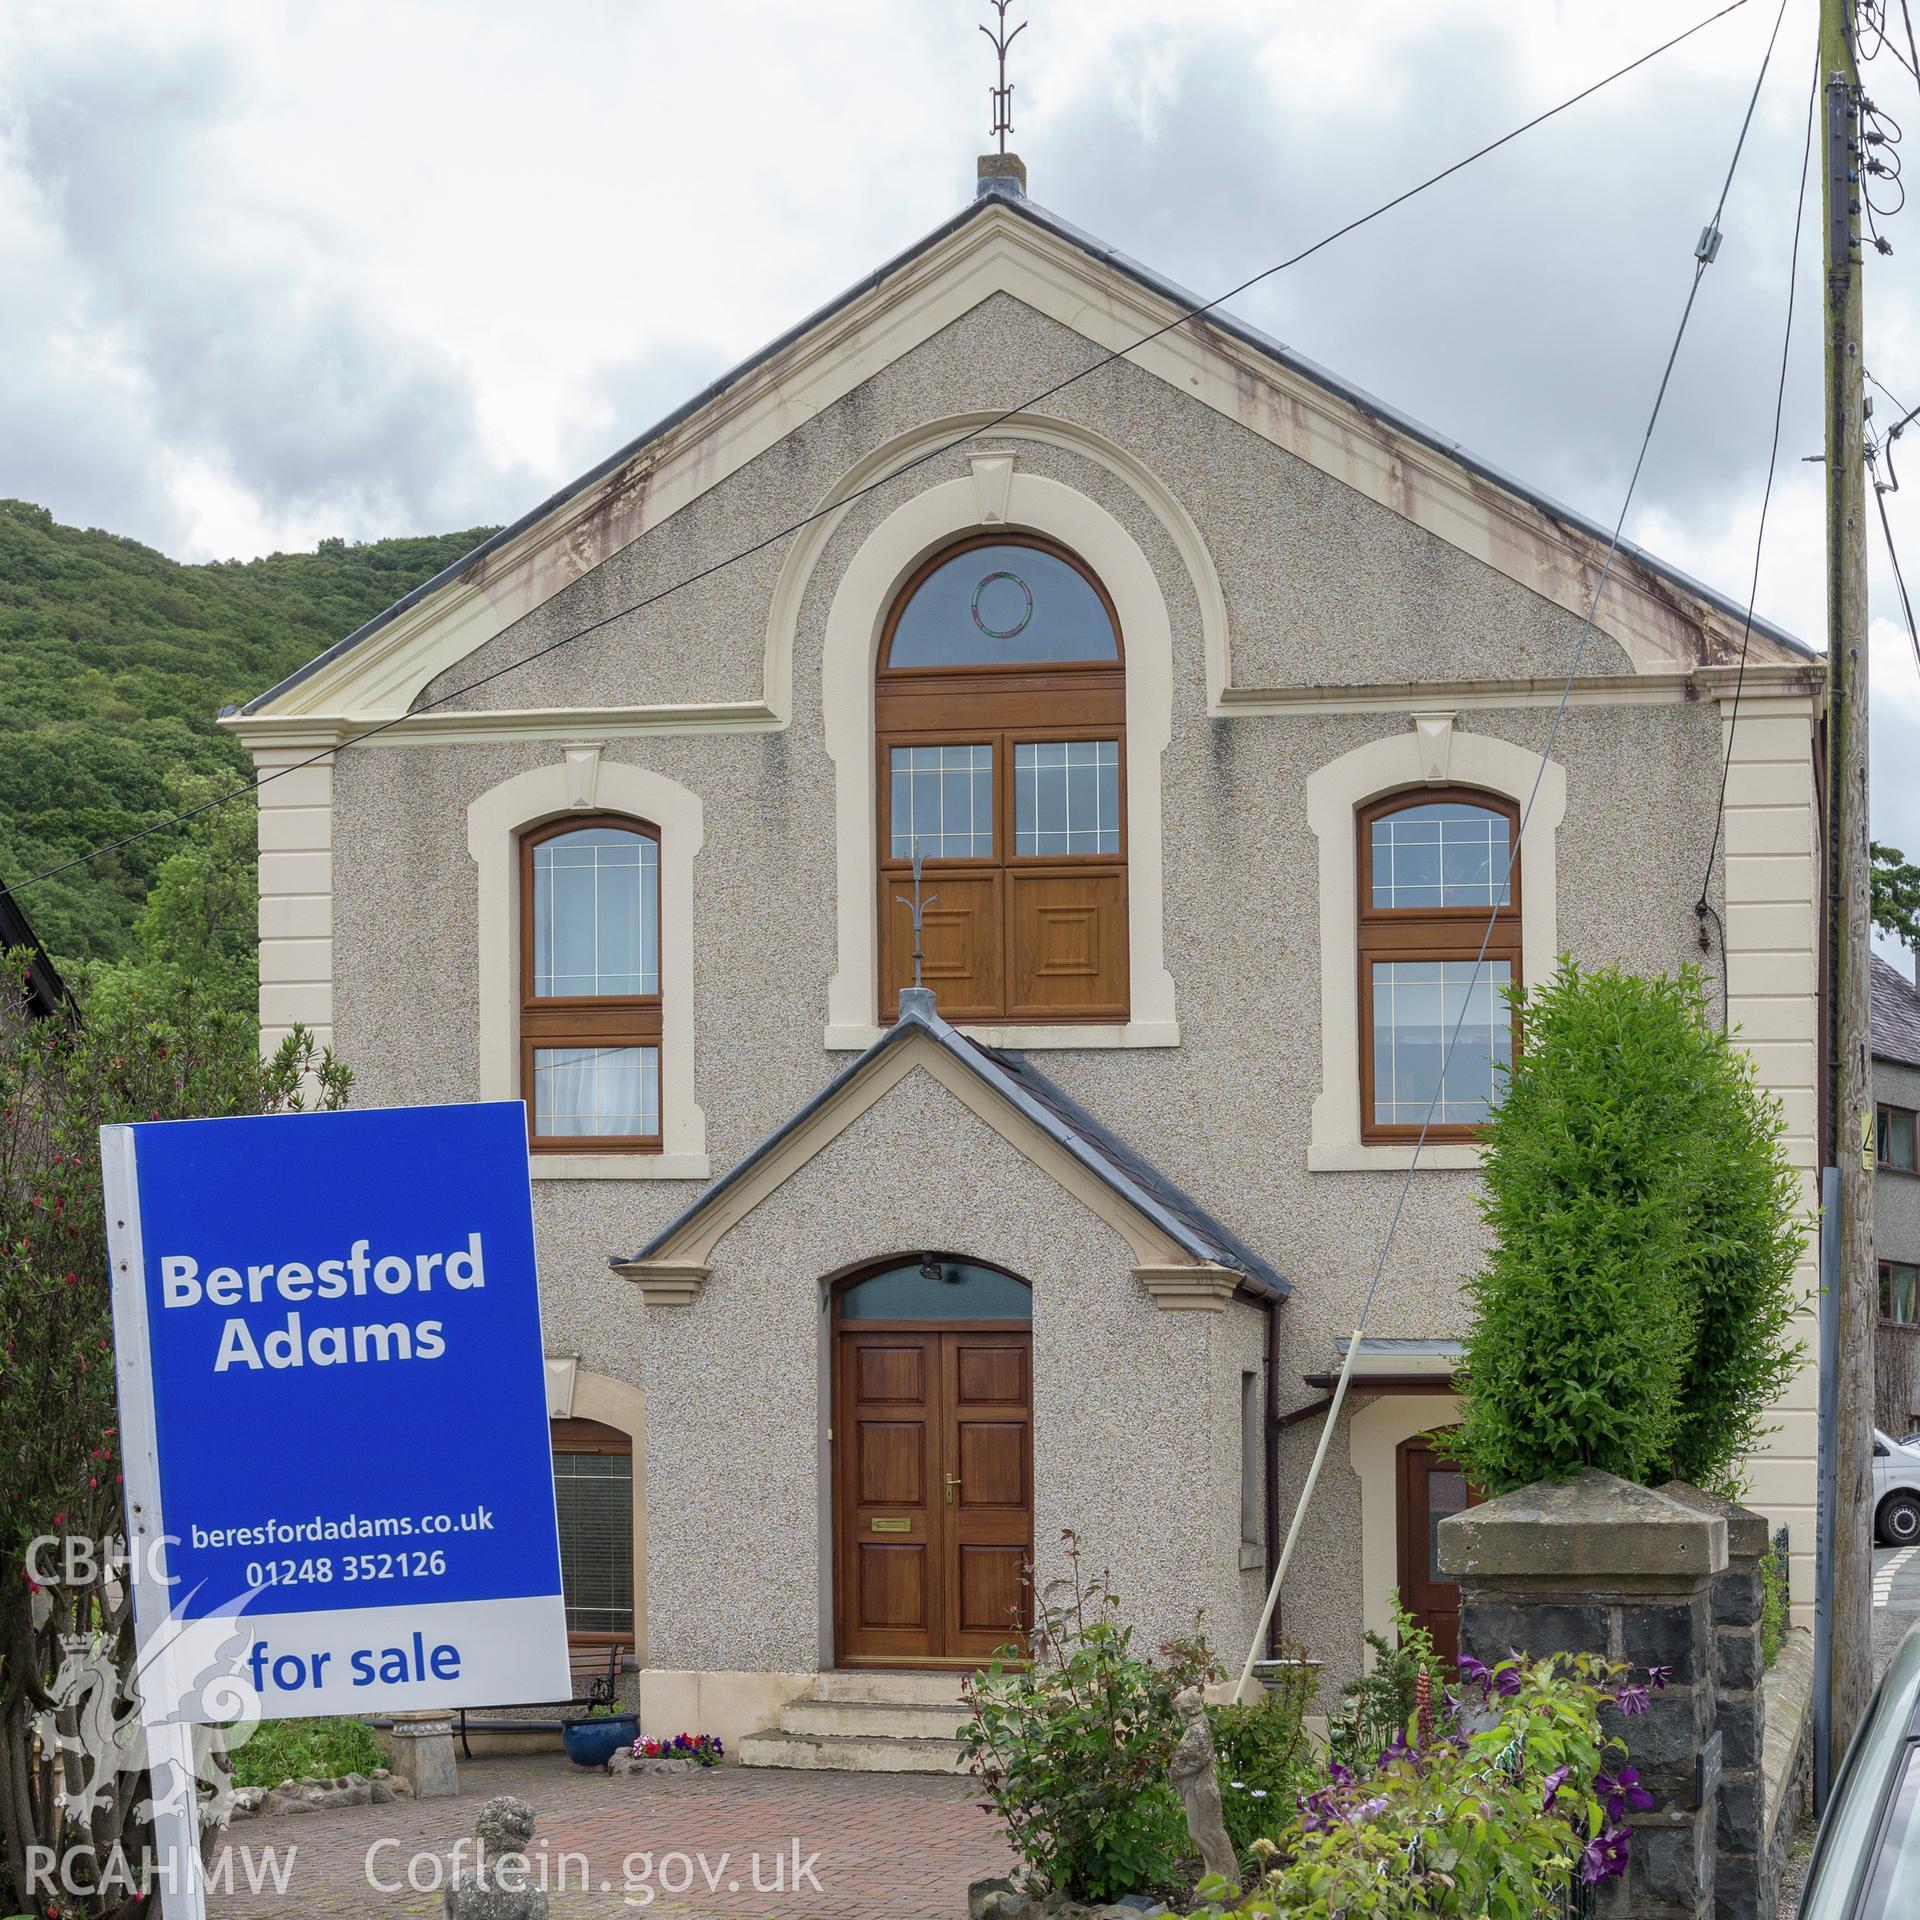 Colour photograph showing front elevation and entrance of Soar Wesleyan Methodist Chapel, Abergwyngregyn. Photographed by Richard Barrett on 15th June 2018.